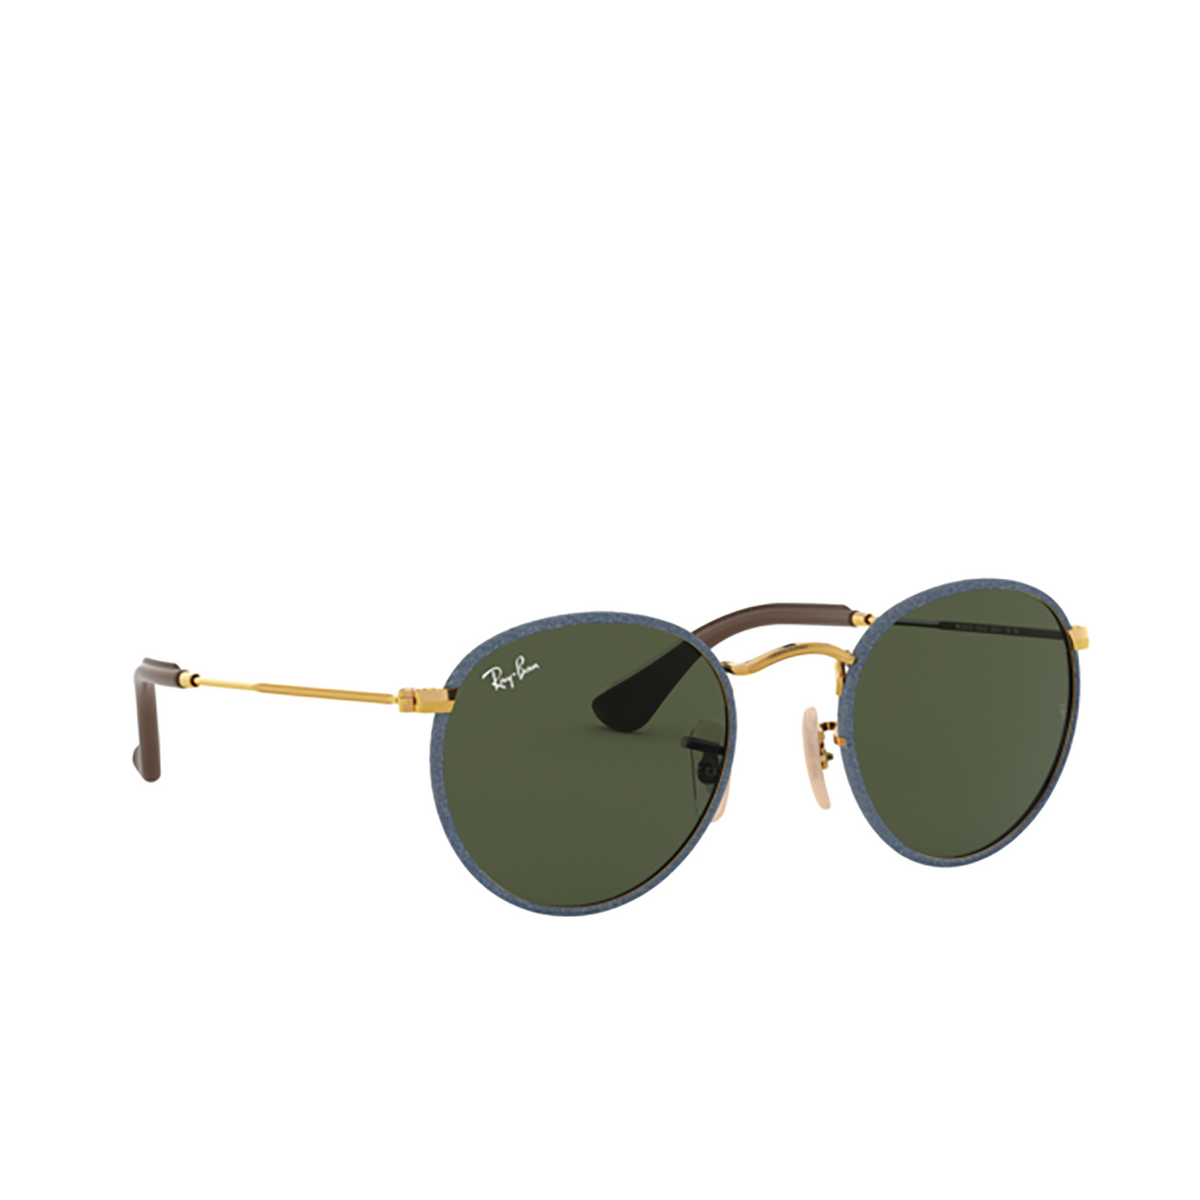 Ray-Ban ROUND CRAFT Sunglasses 919431 Gold / Blue Jeans - three-quarters view